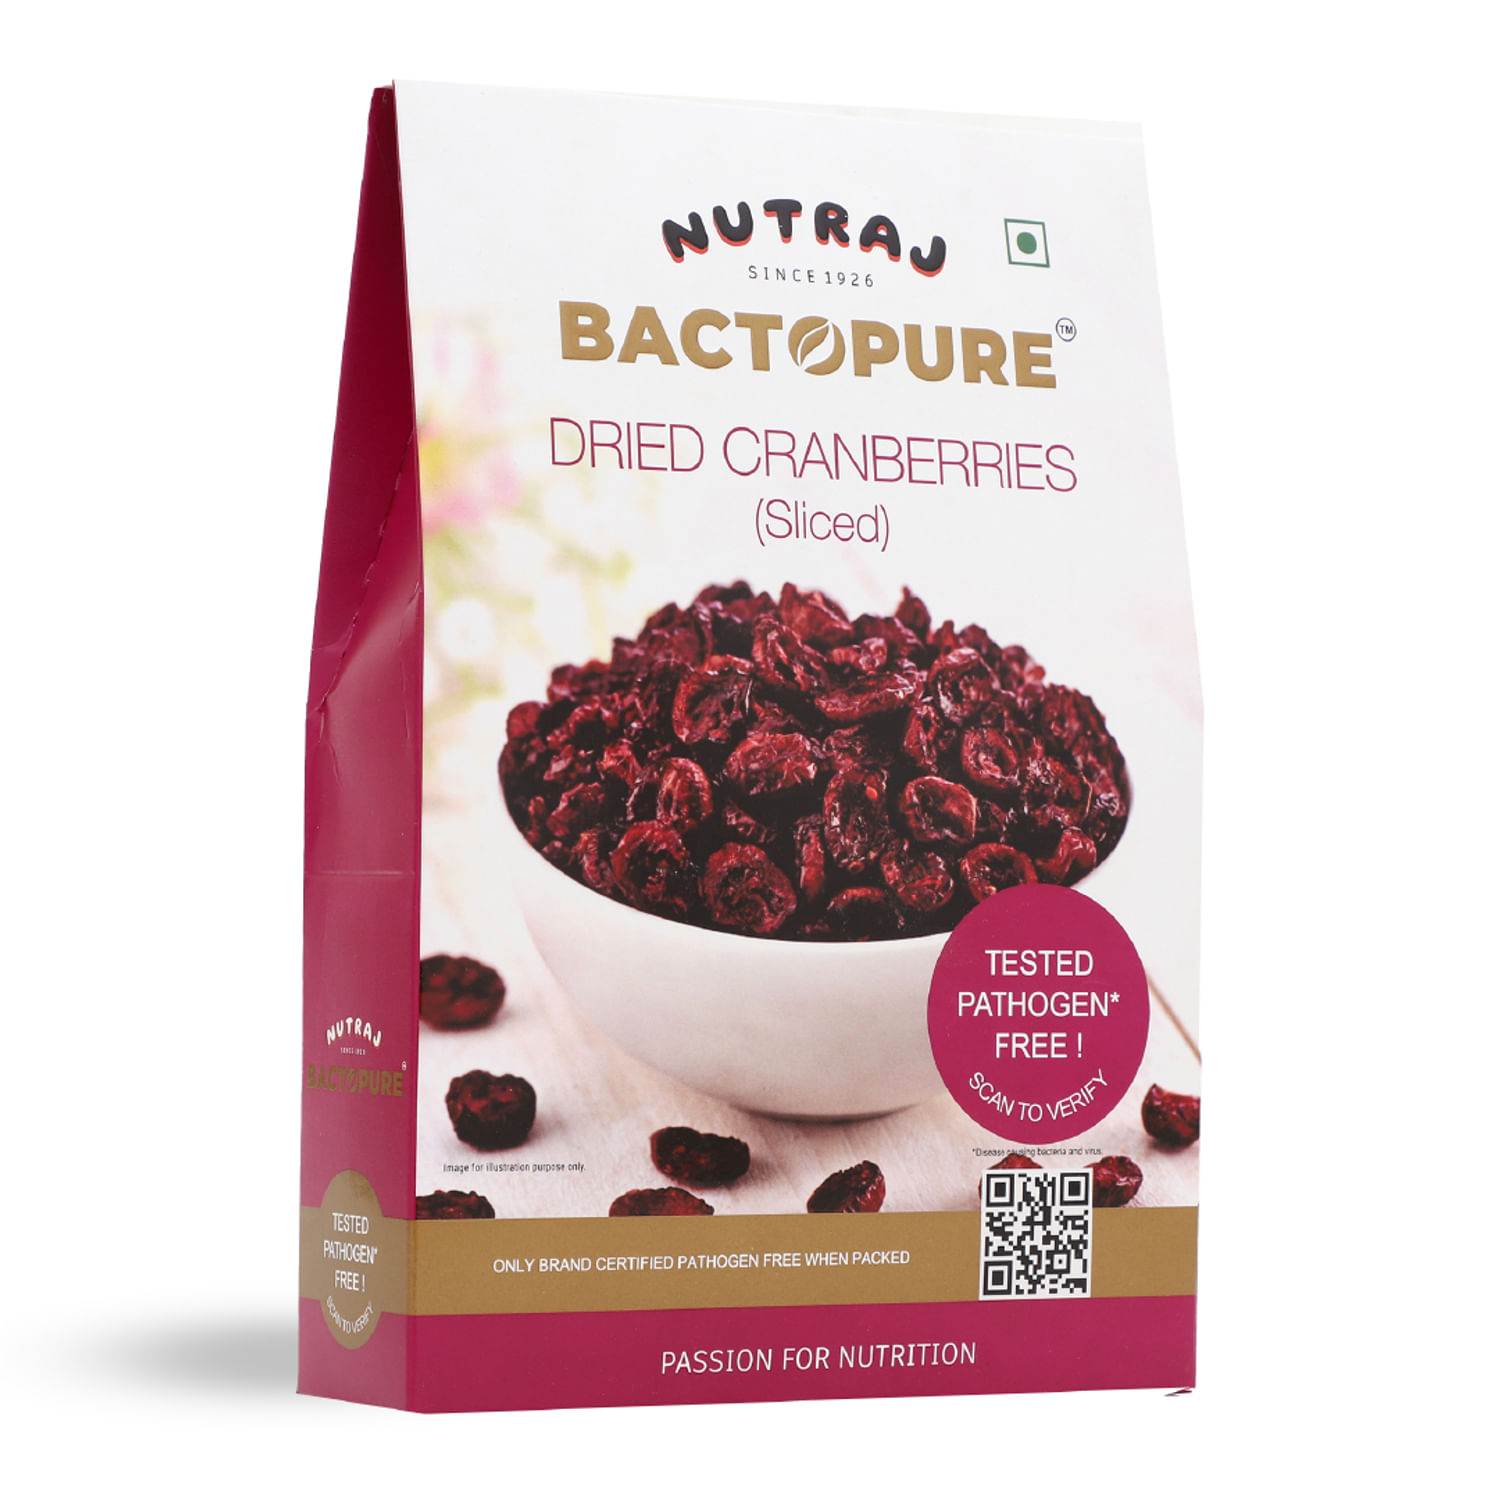 Bactopure Cranberries Sliced 200 gm - Pack of 2